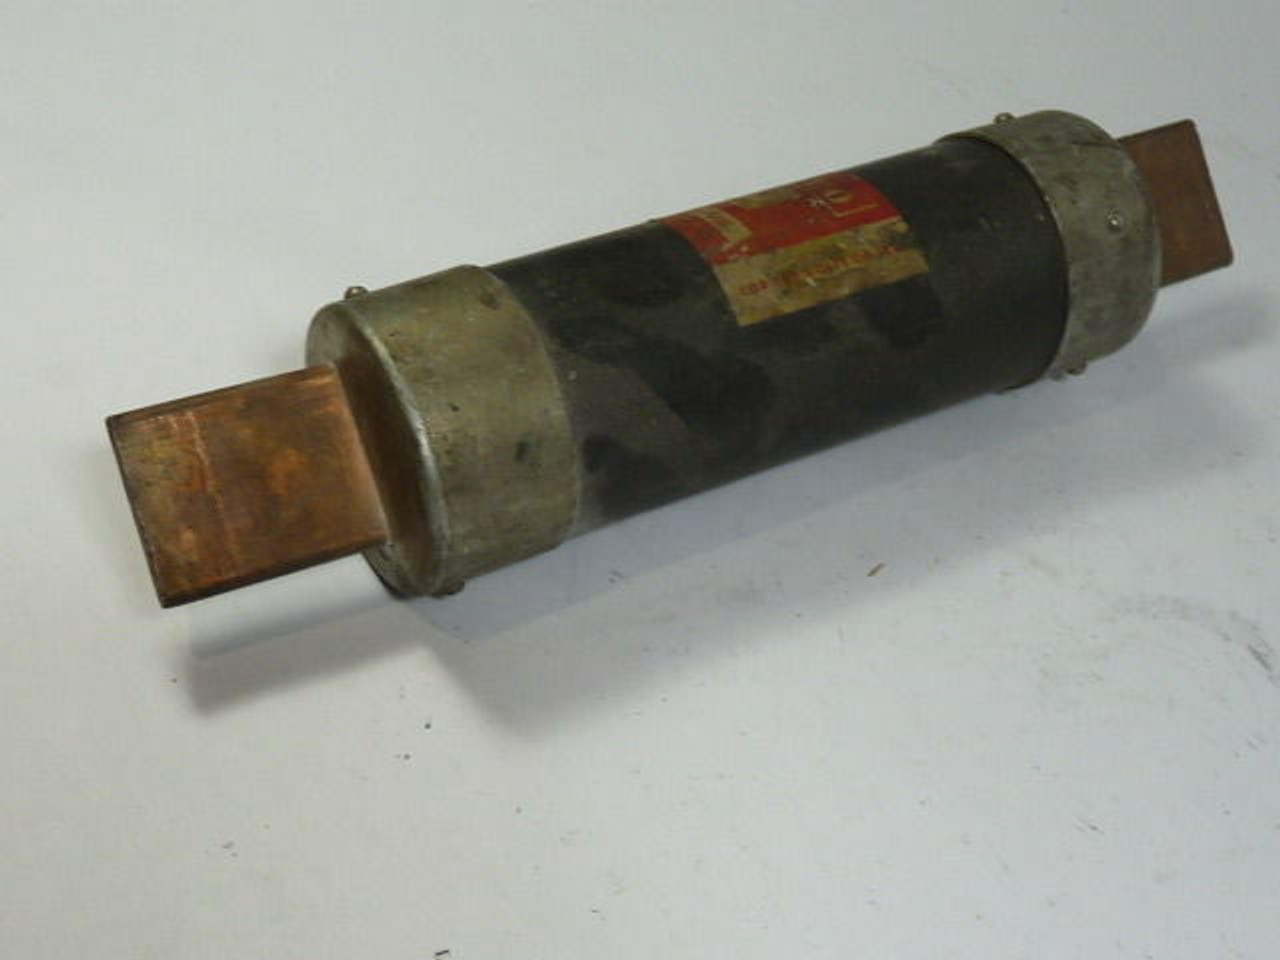 Cefco OT400/600 One Time Fuse 400A 600V USED